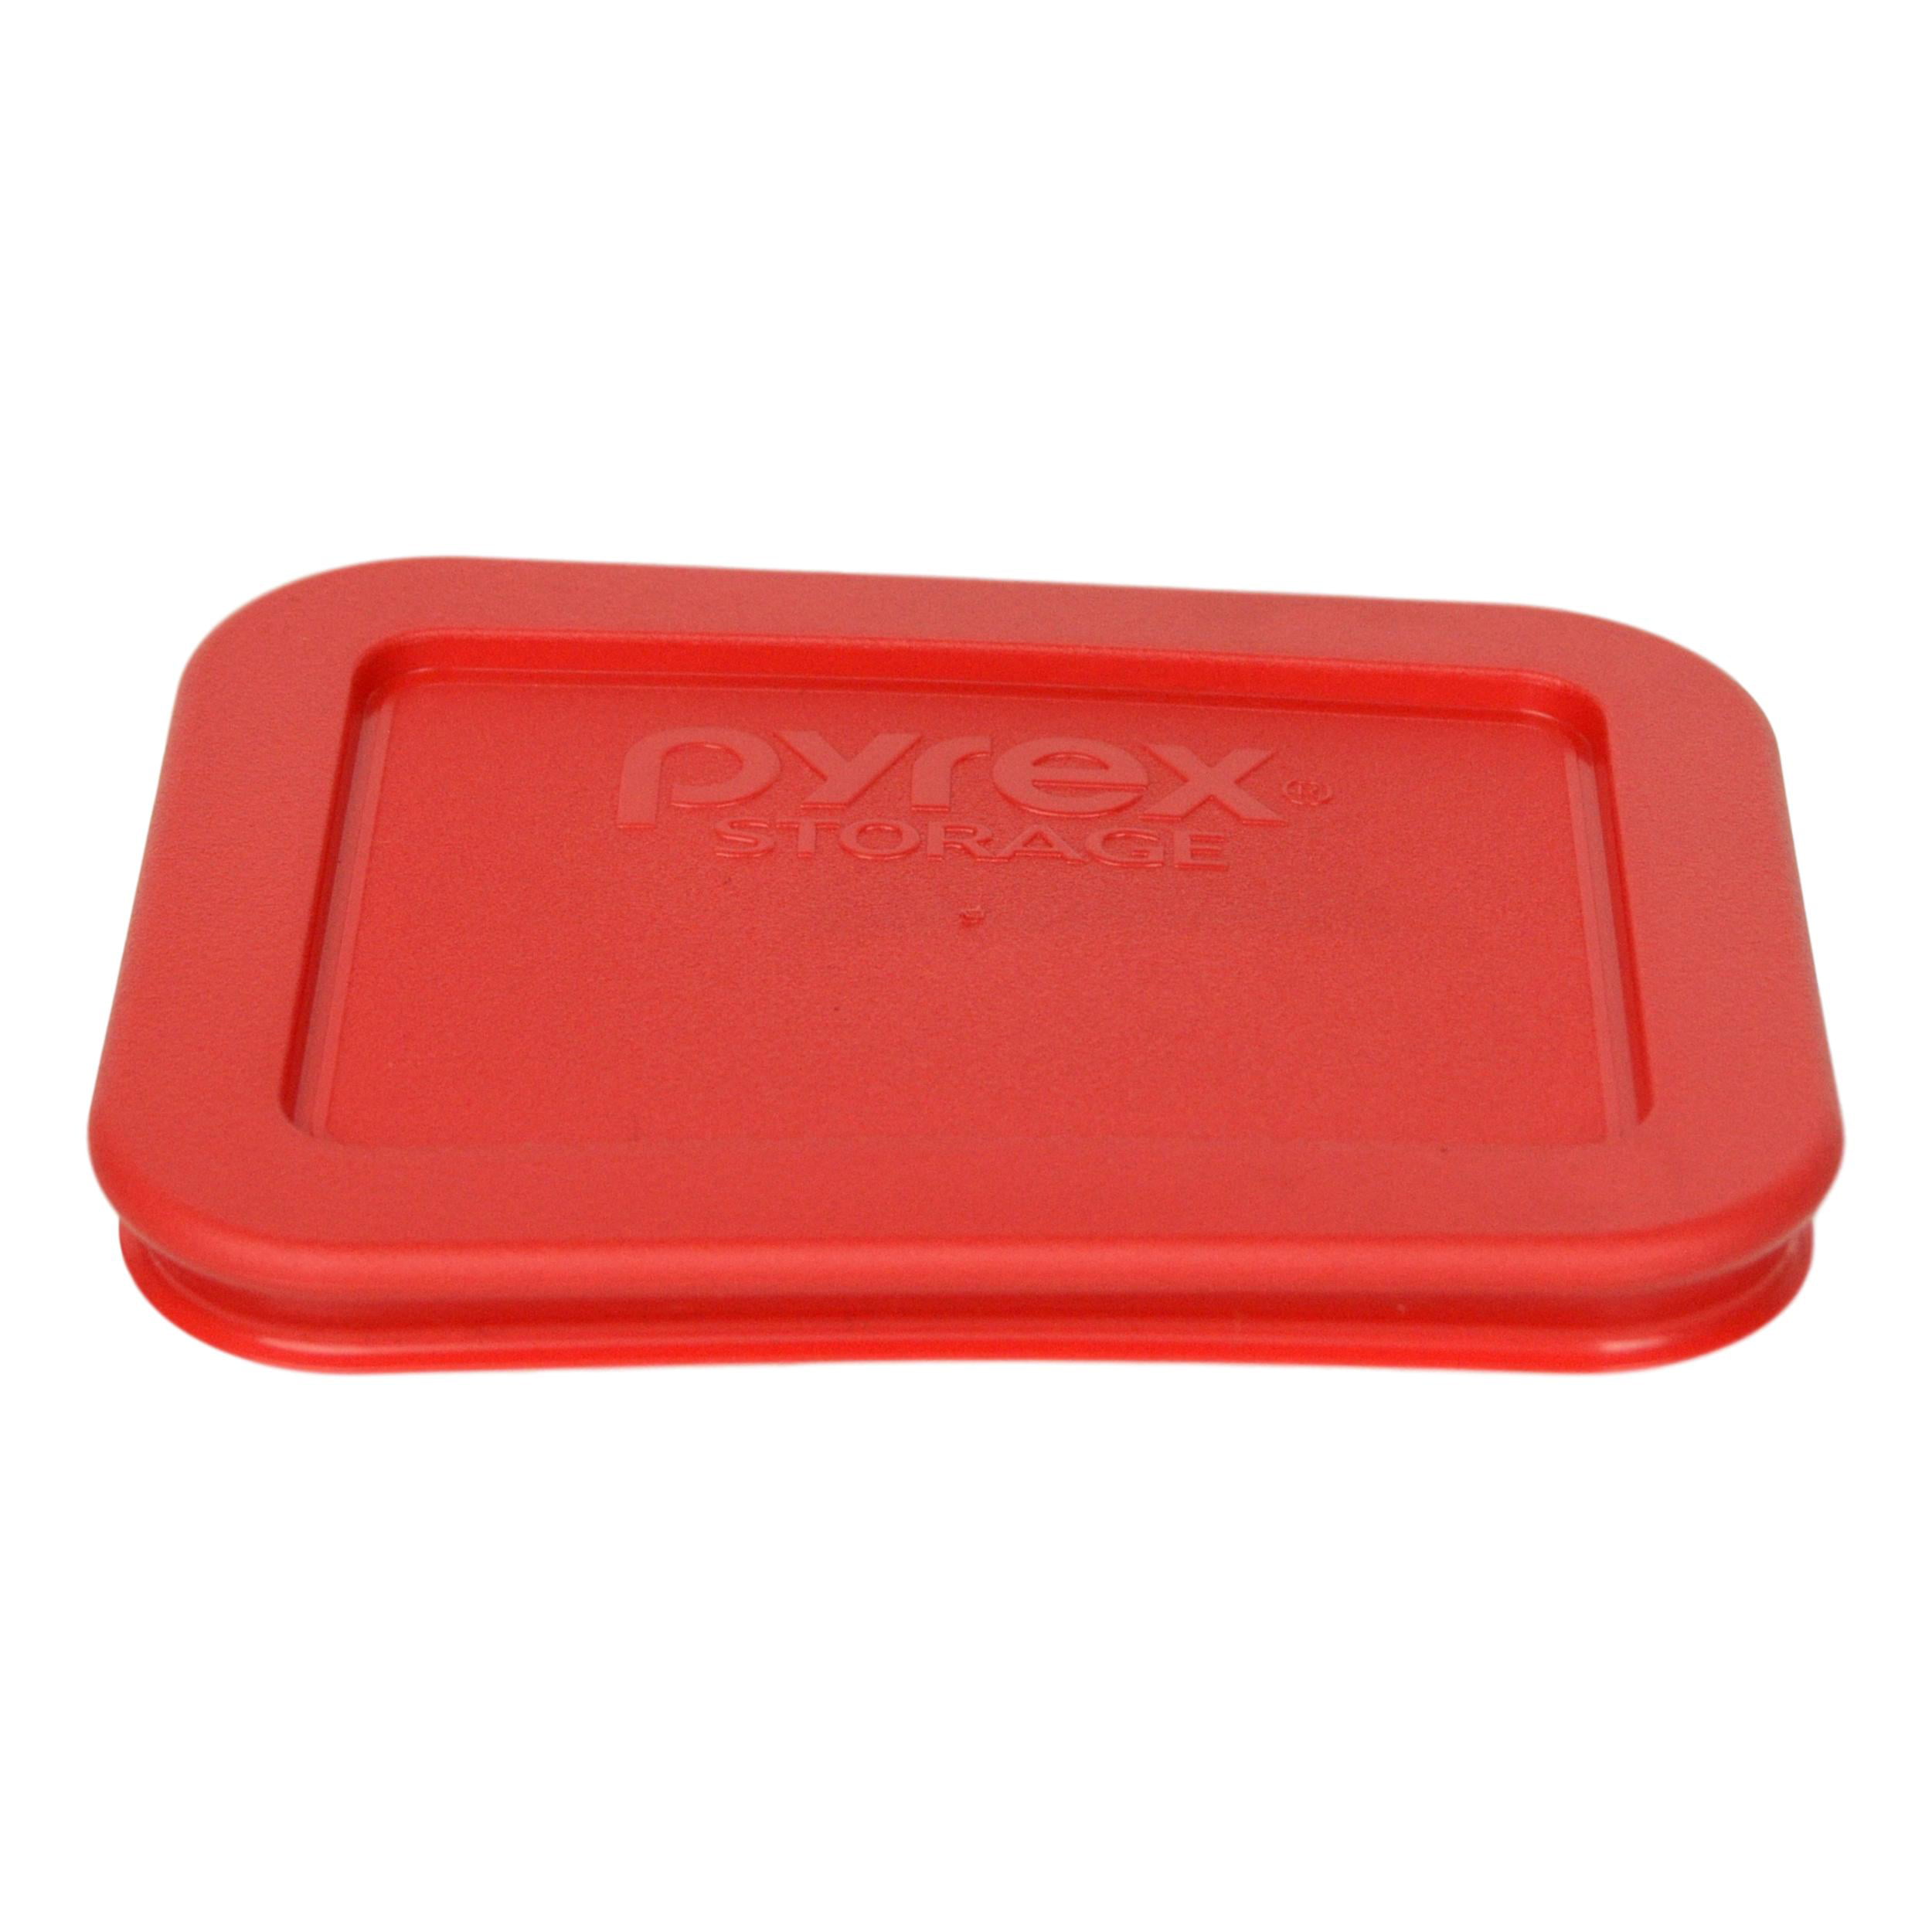 Pyrex 7214-Pc 4.8 Cup Red Rectangle Plastic Food Storage Lid 4 Pack